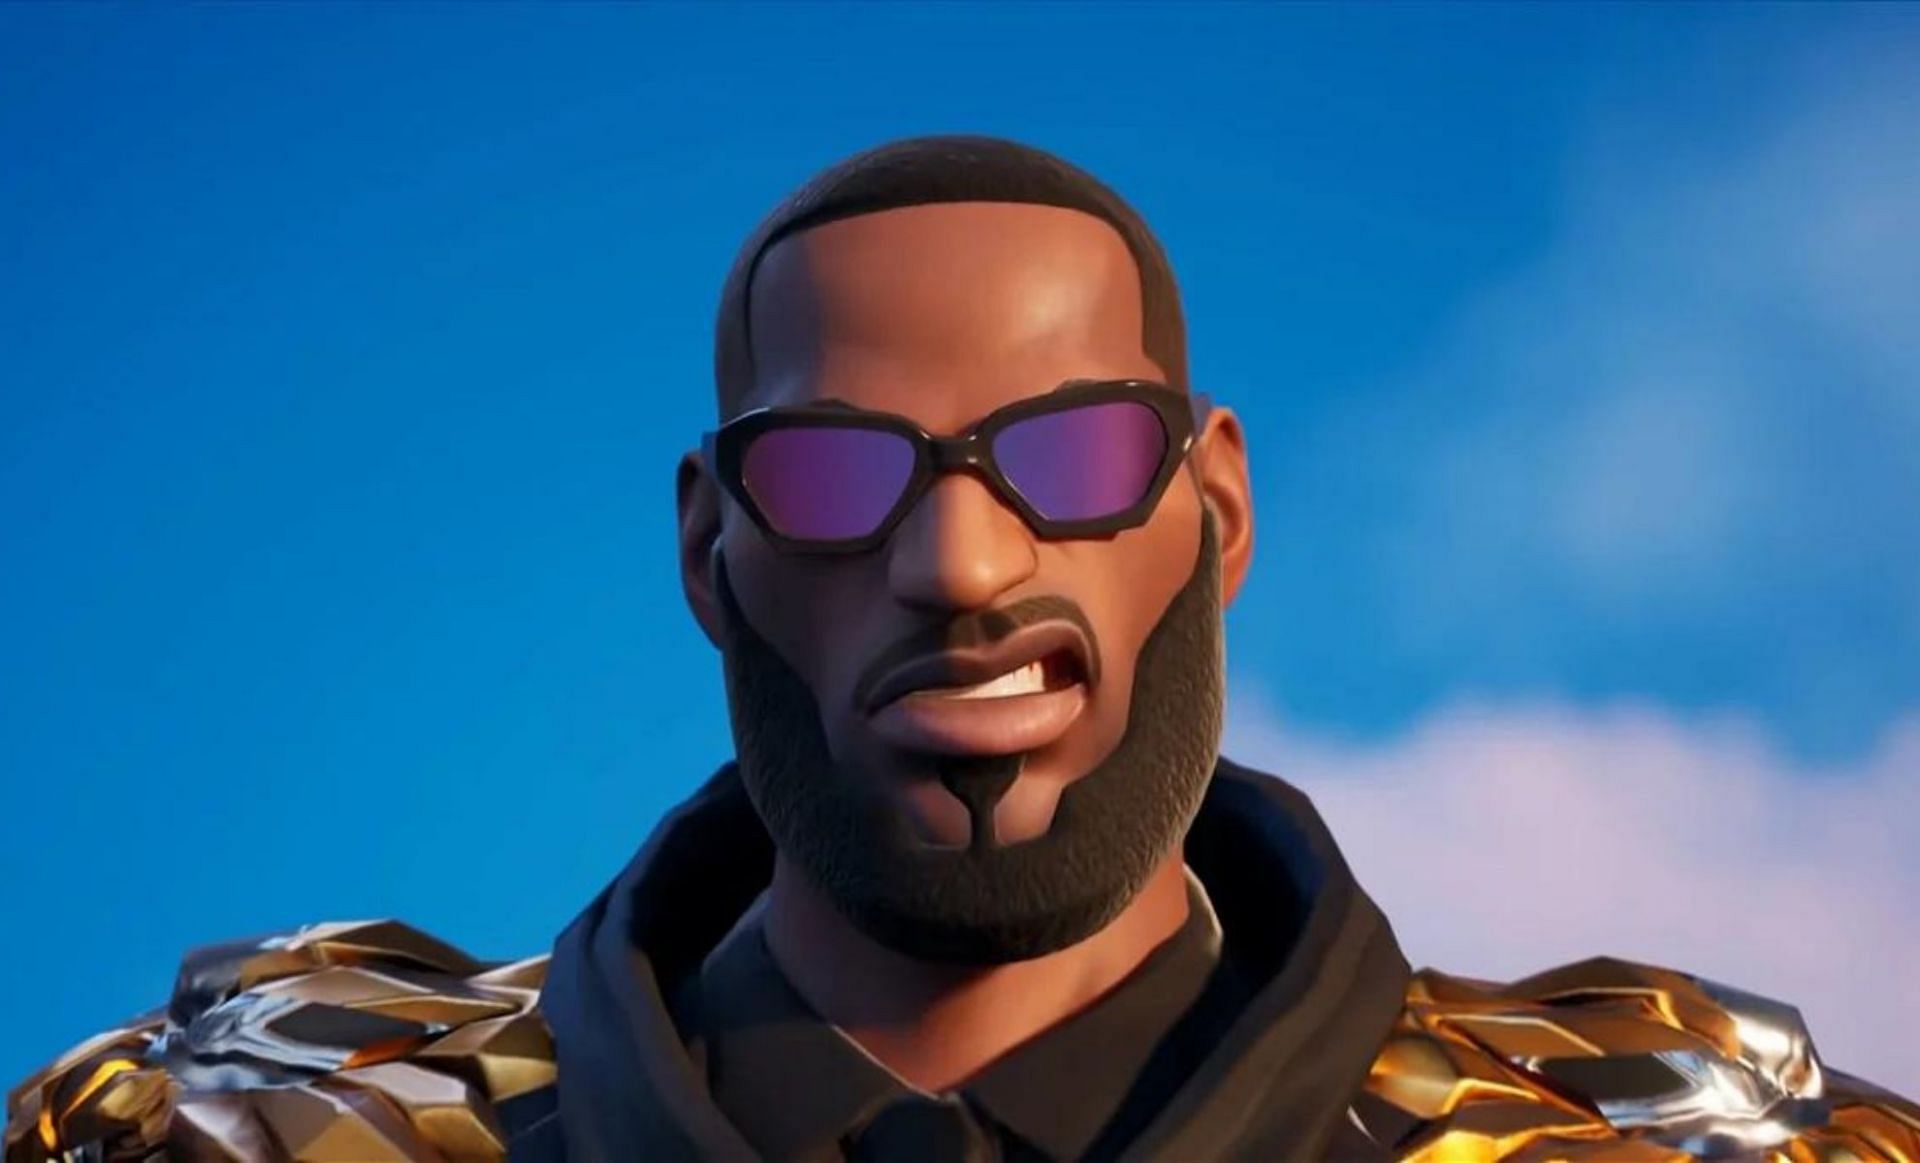 LeBron James has a style wearing glasses (Image via Epic Games)